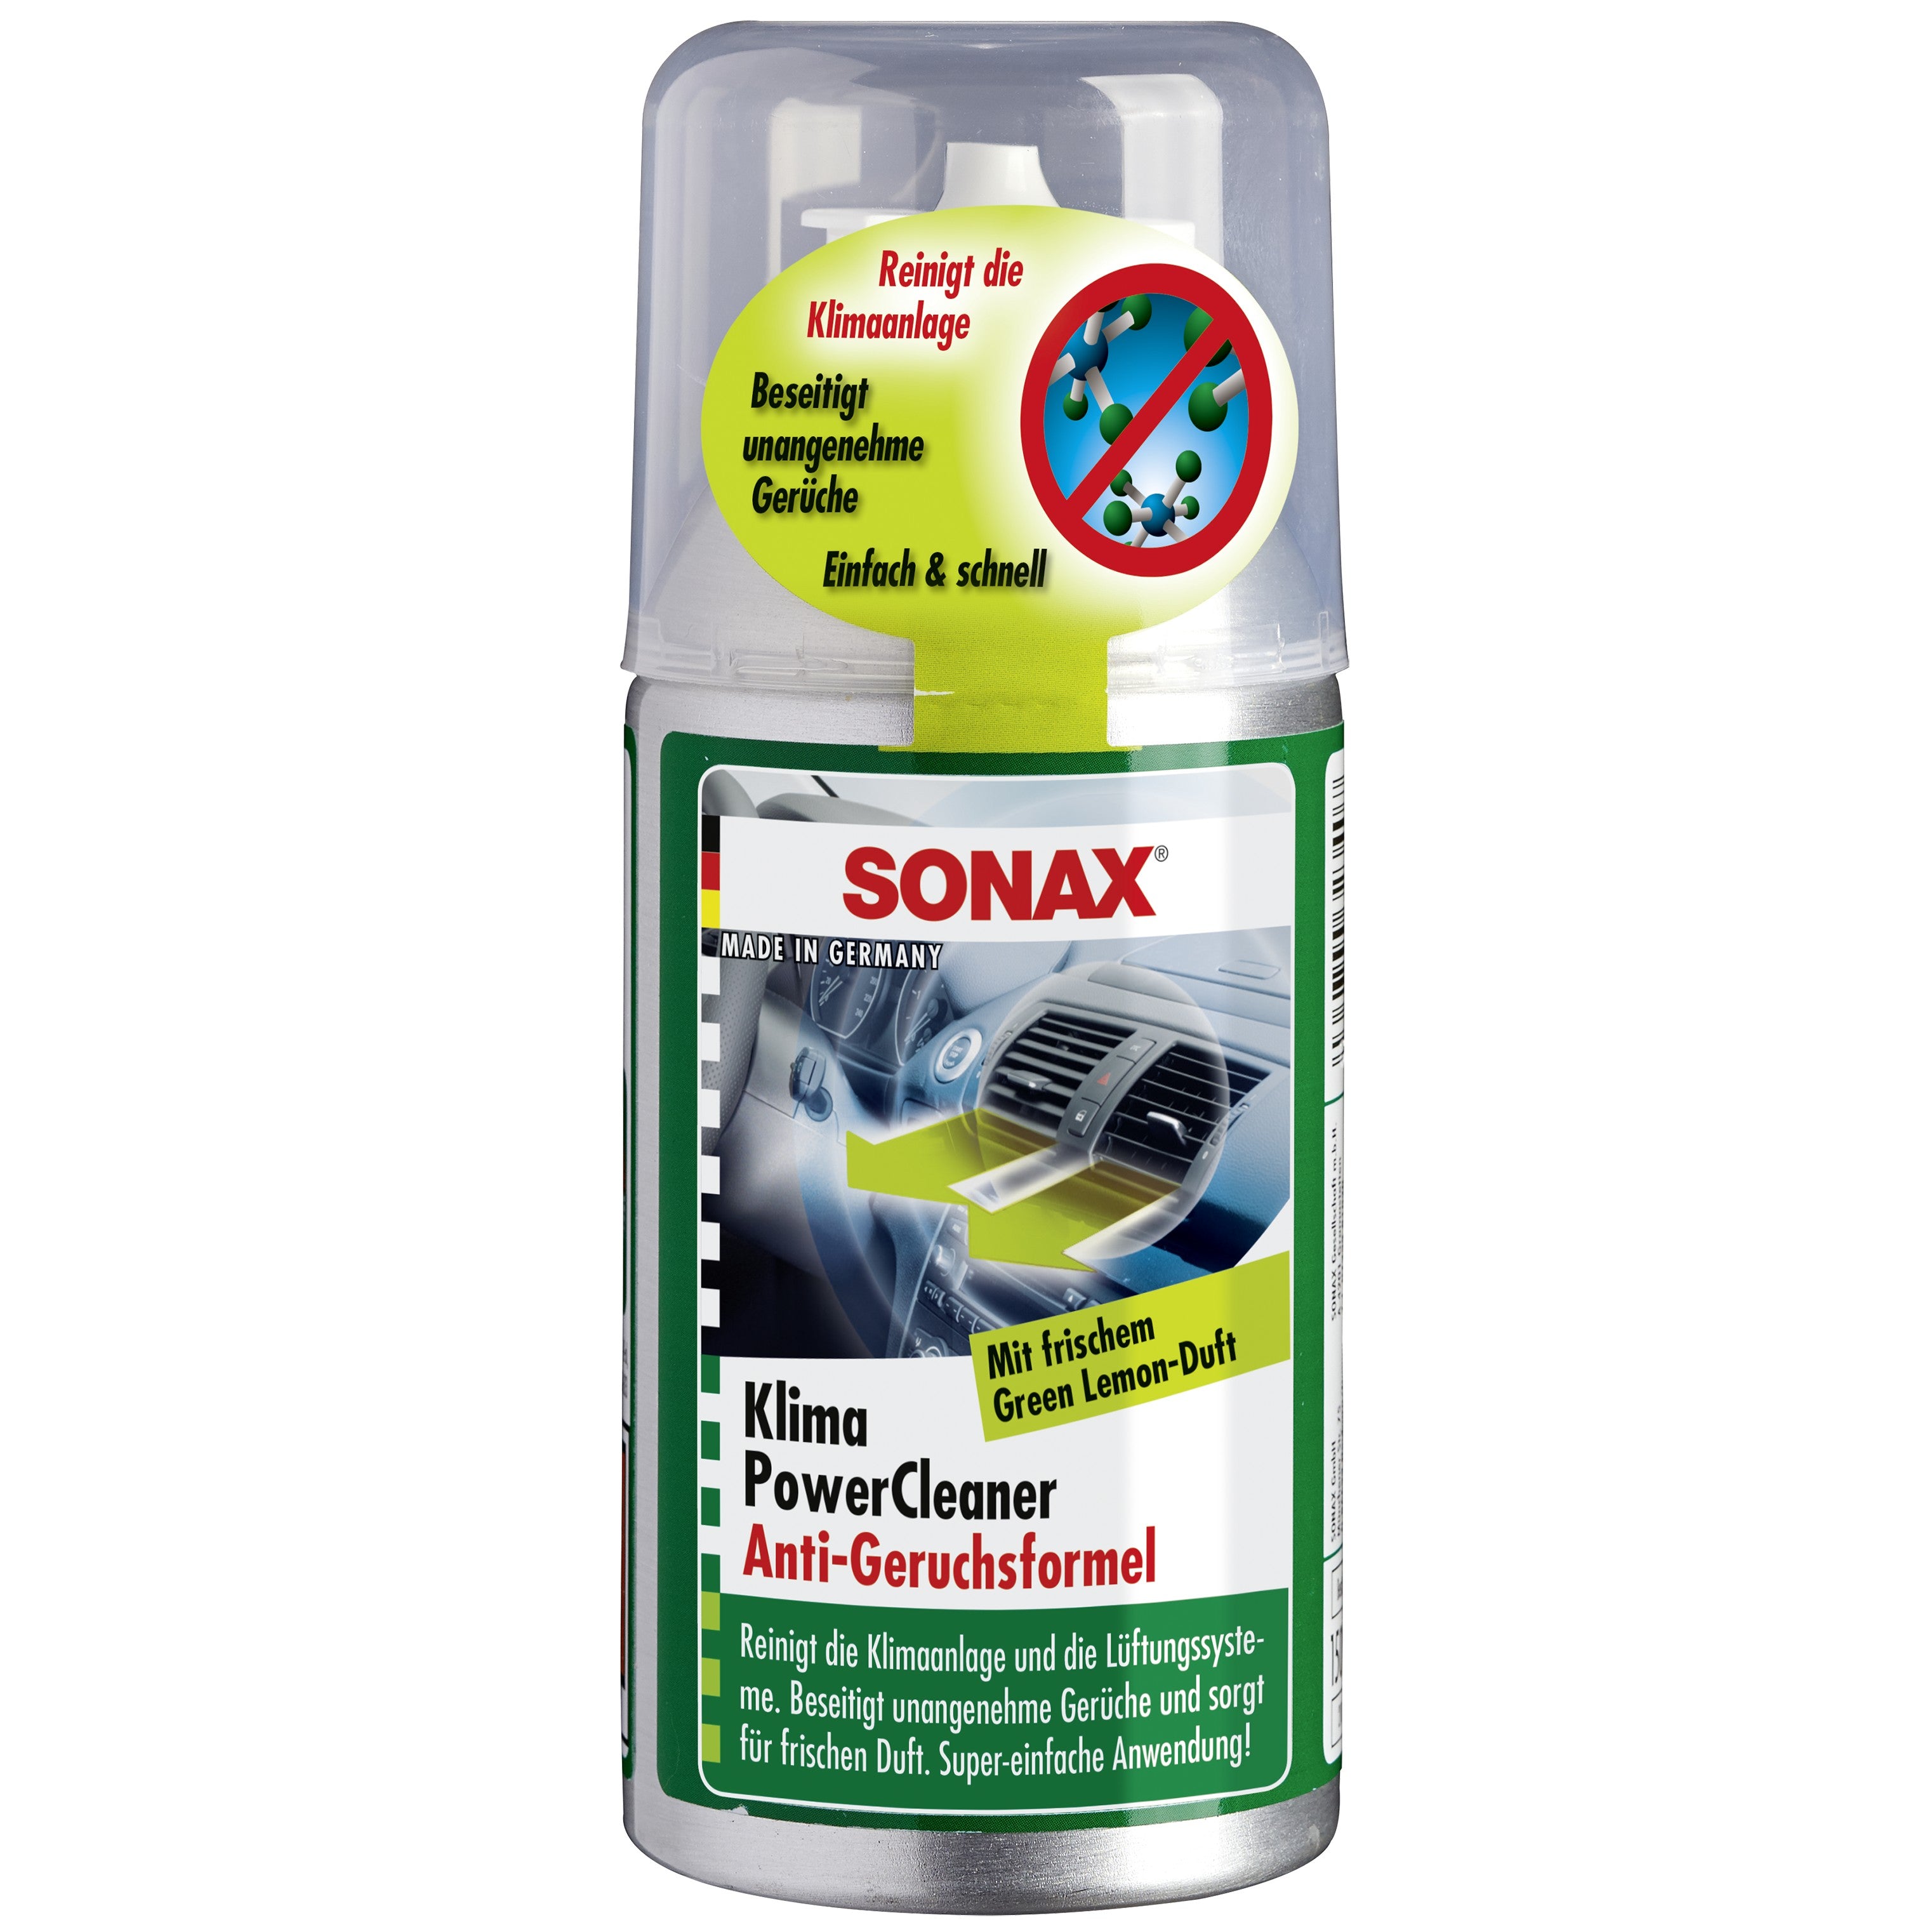 Sonax Climate Power Cleaner